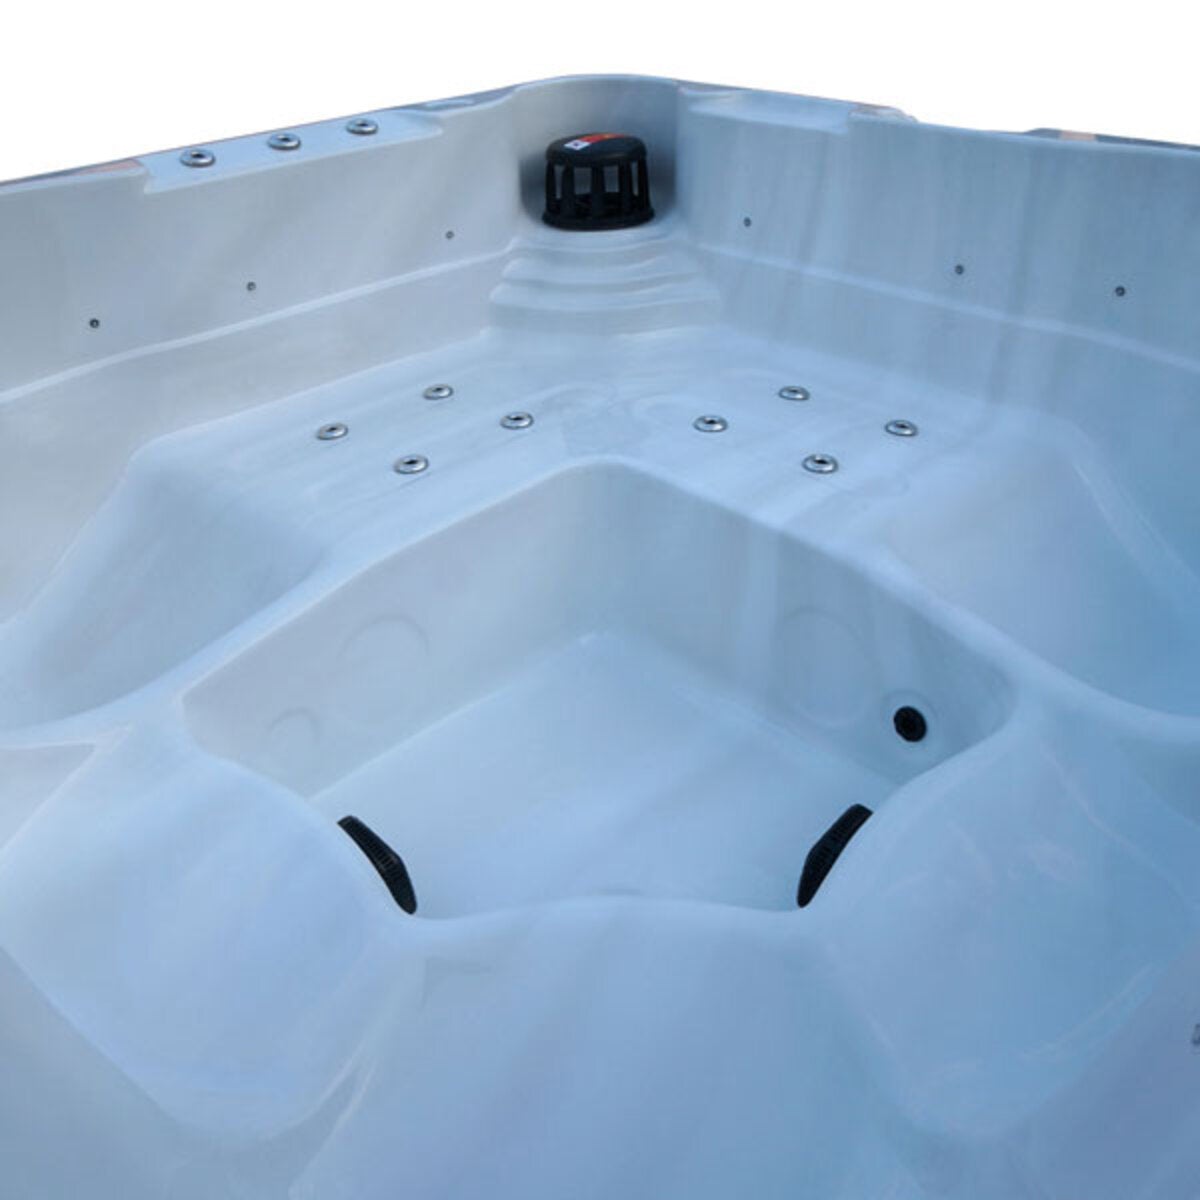 Hot Tub Master Angel Stream II 36-Jet 5 Person Hot Tub - Delivered and Installed